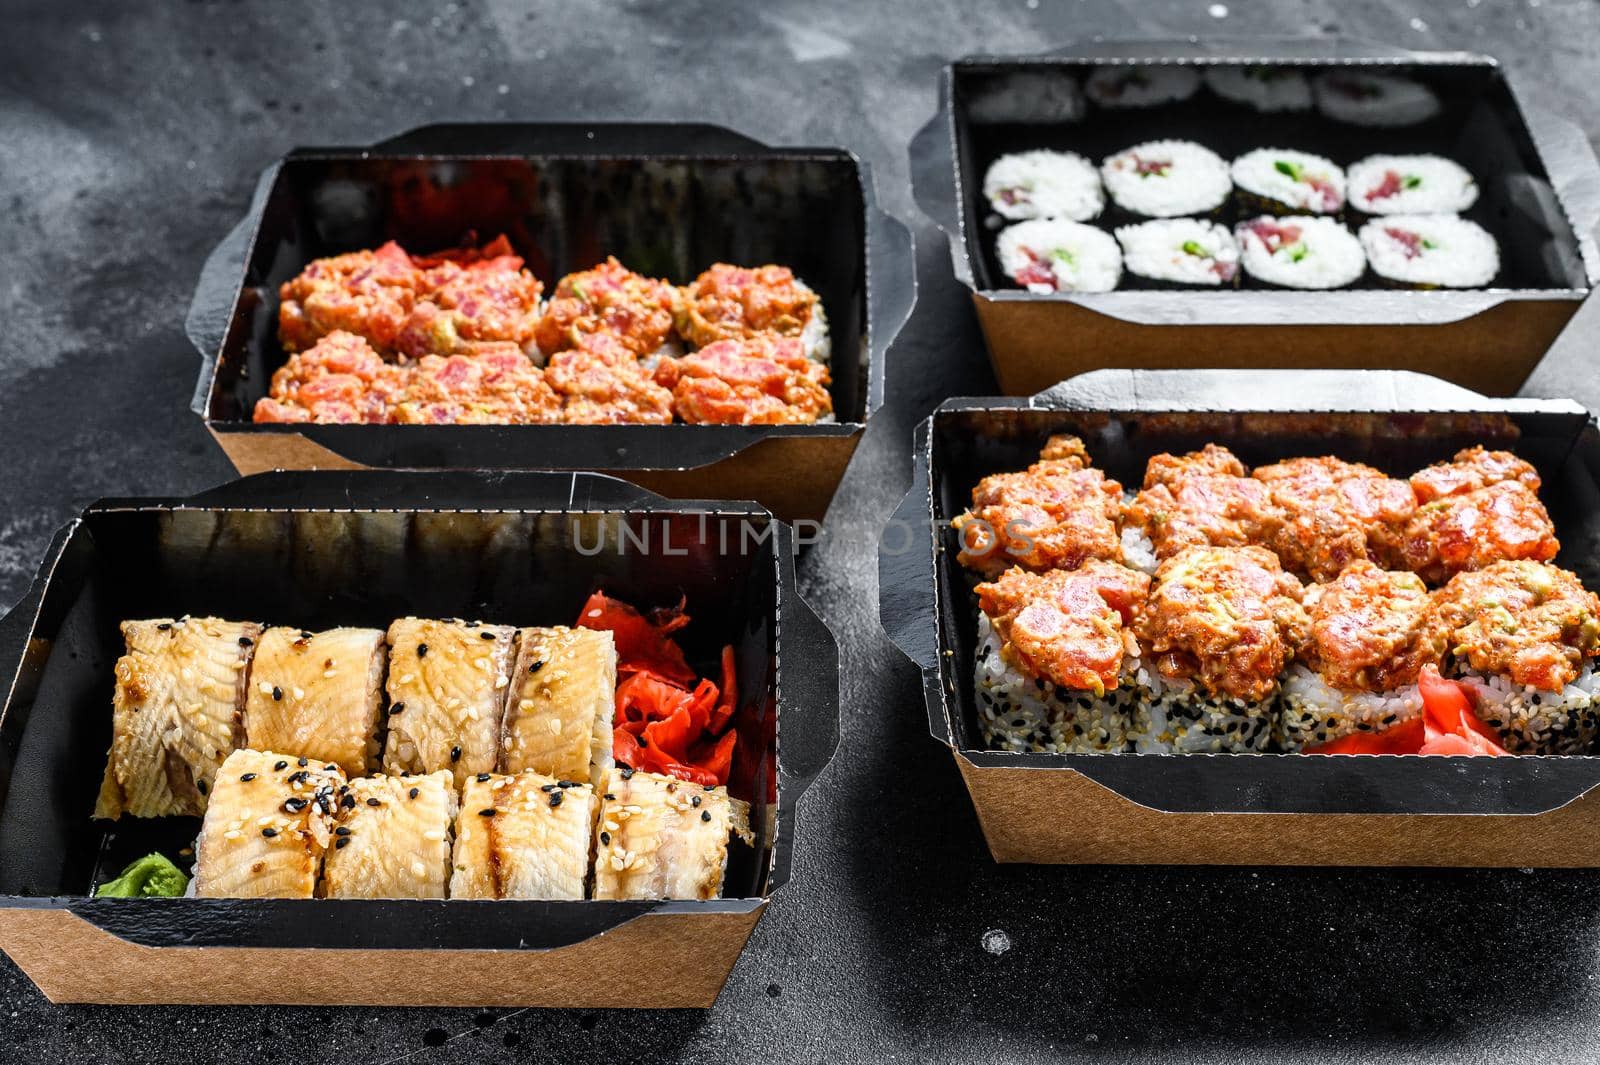 The sushi rolls in the delivery package, ordered in sushi take-out restaurant. Black background. Top view by Composter